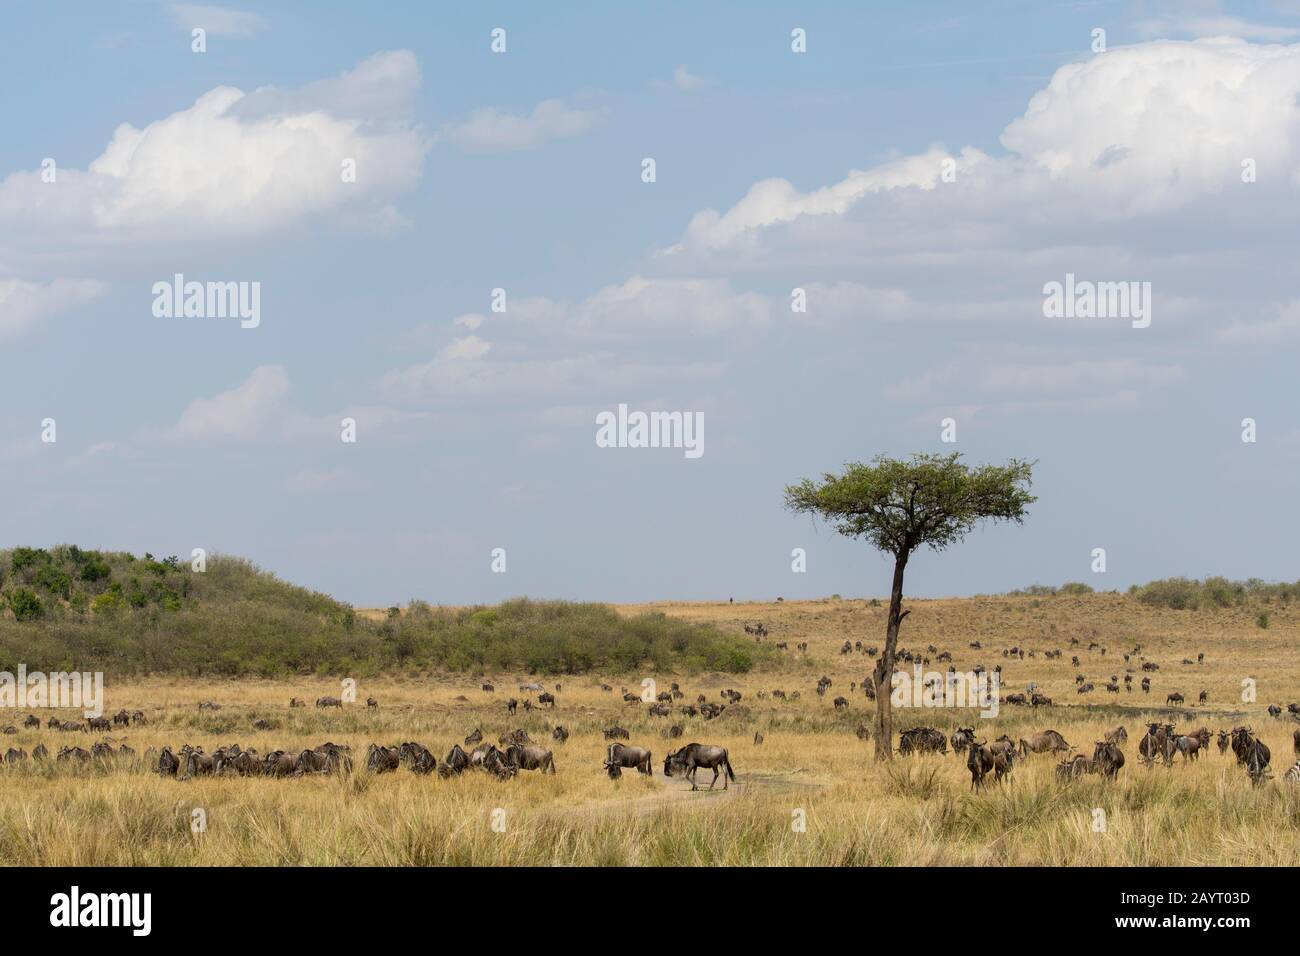 Wildebeests, also called gnus or wildebai, and Plains zebras (Equus quagga, formerly Equus burchellii) also known as the common zebra or Burchell's ze Stock Photo